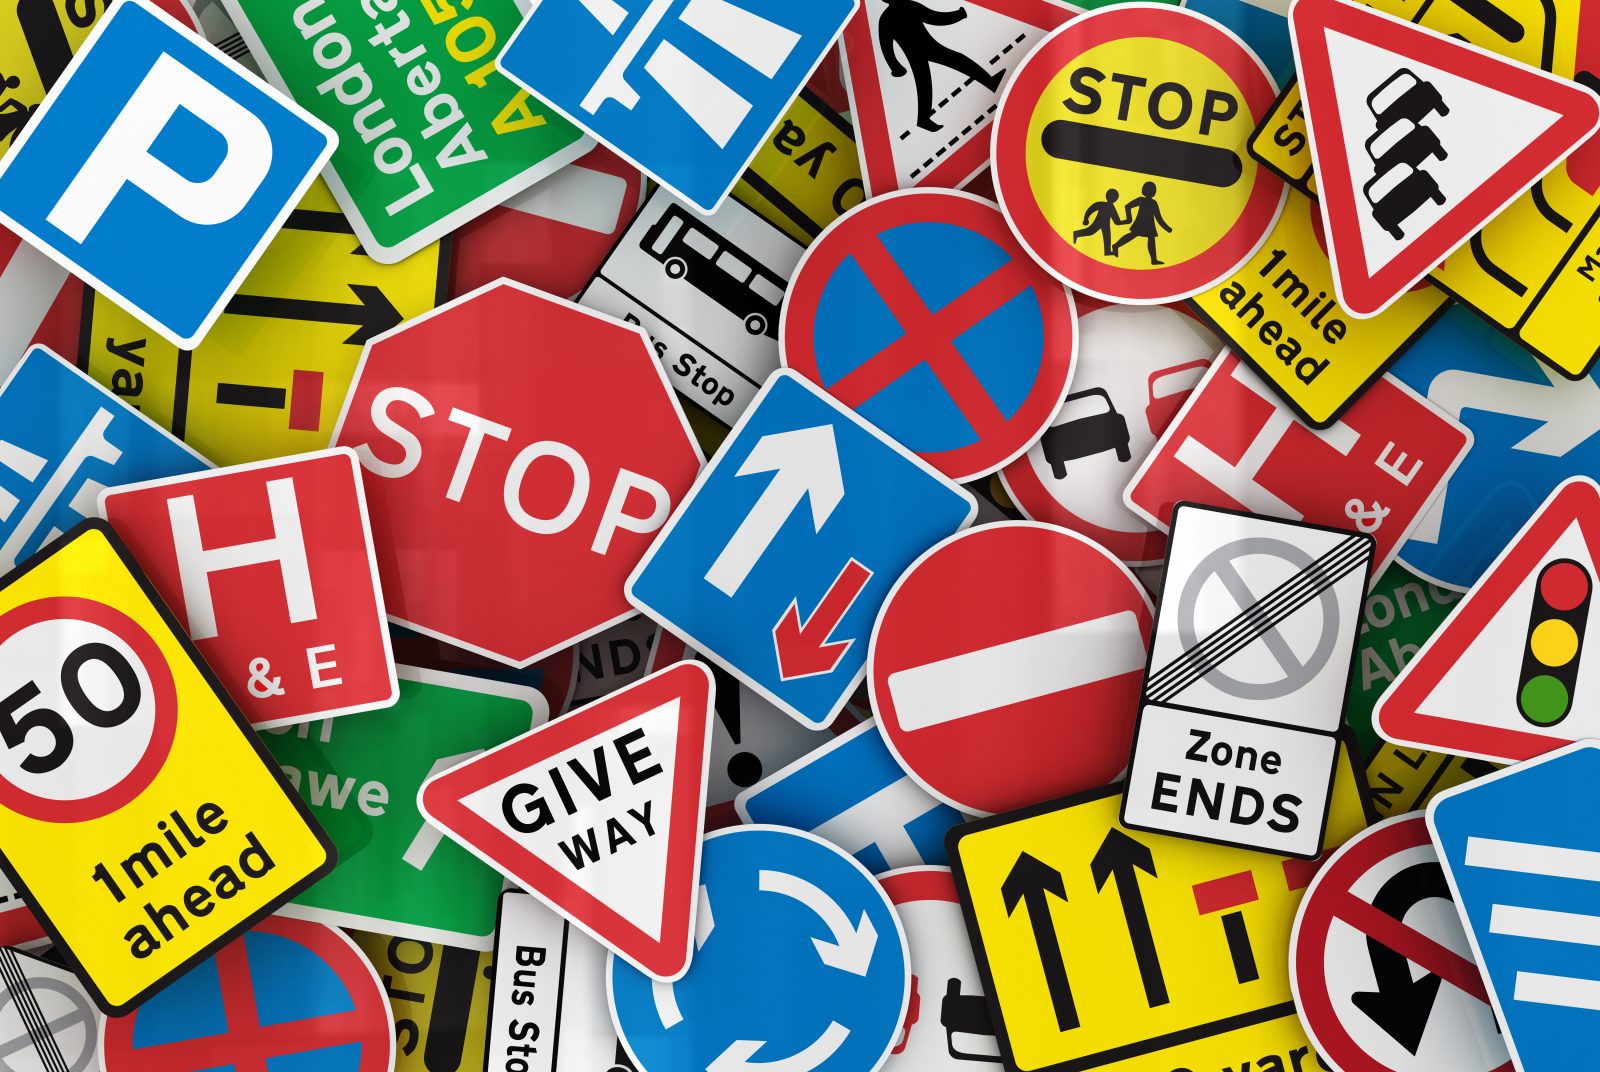 The UK’s most misunderstood road signs